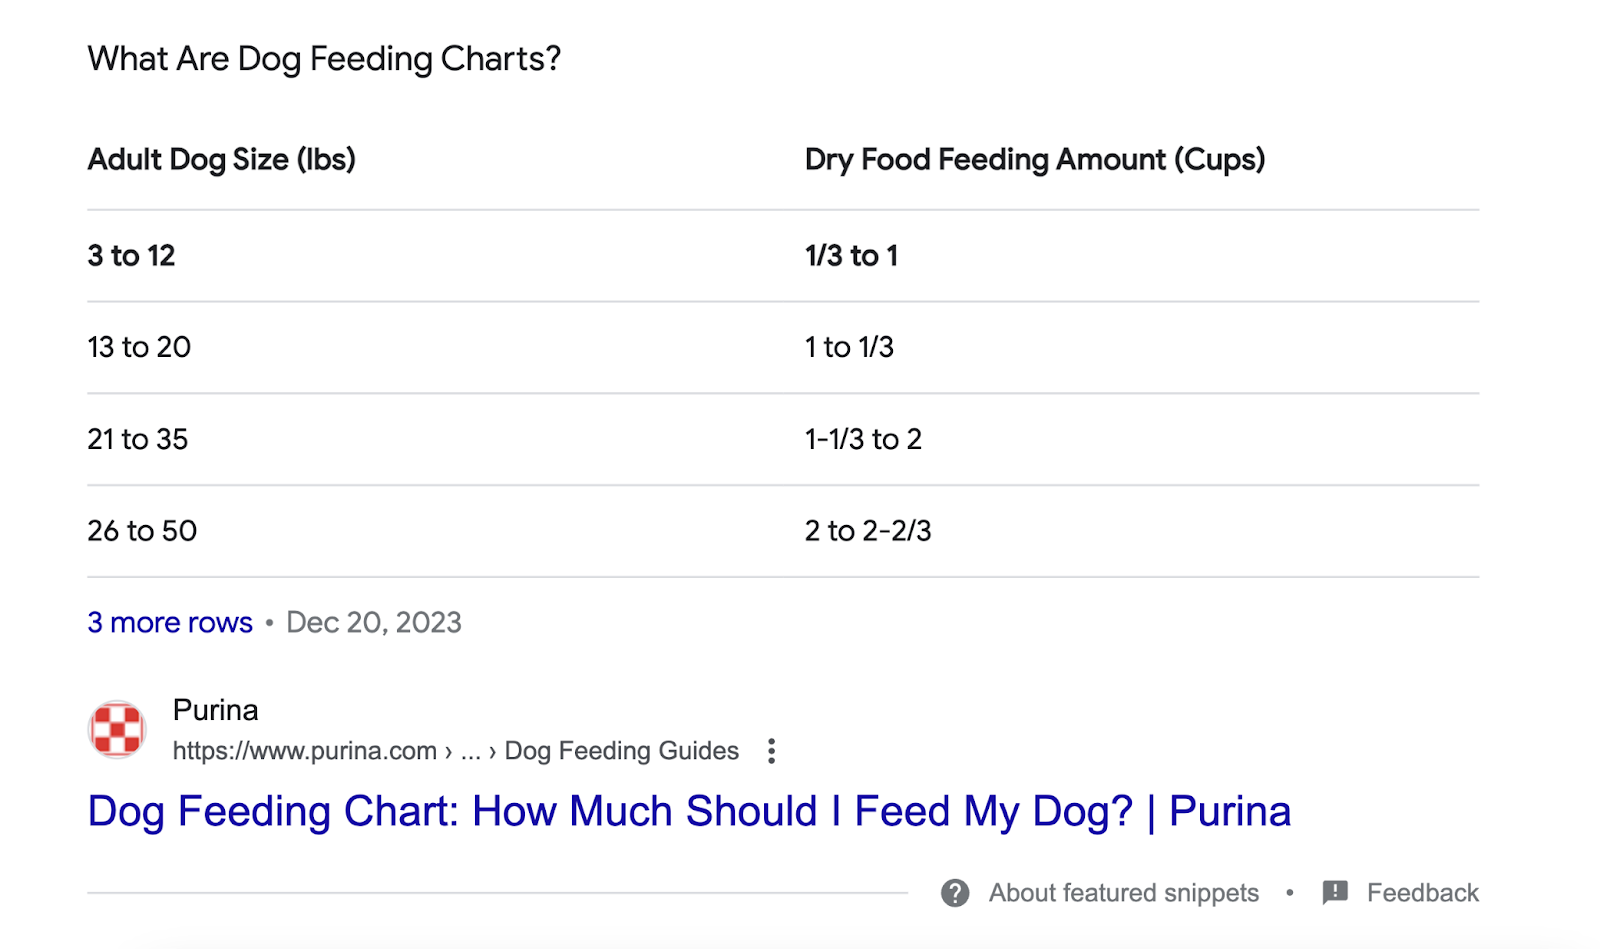 featured snippet for dog feeding chart shows table of adult dog size and feeding amounts